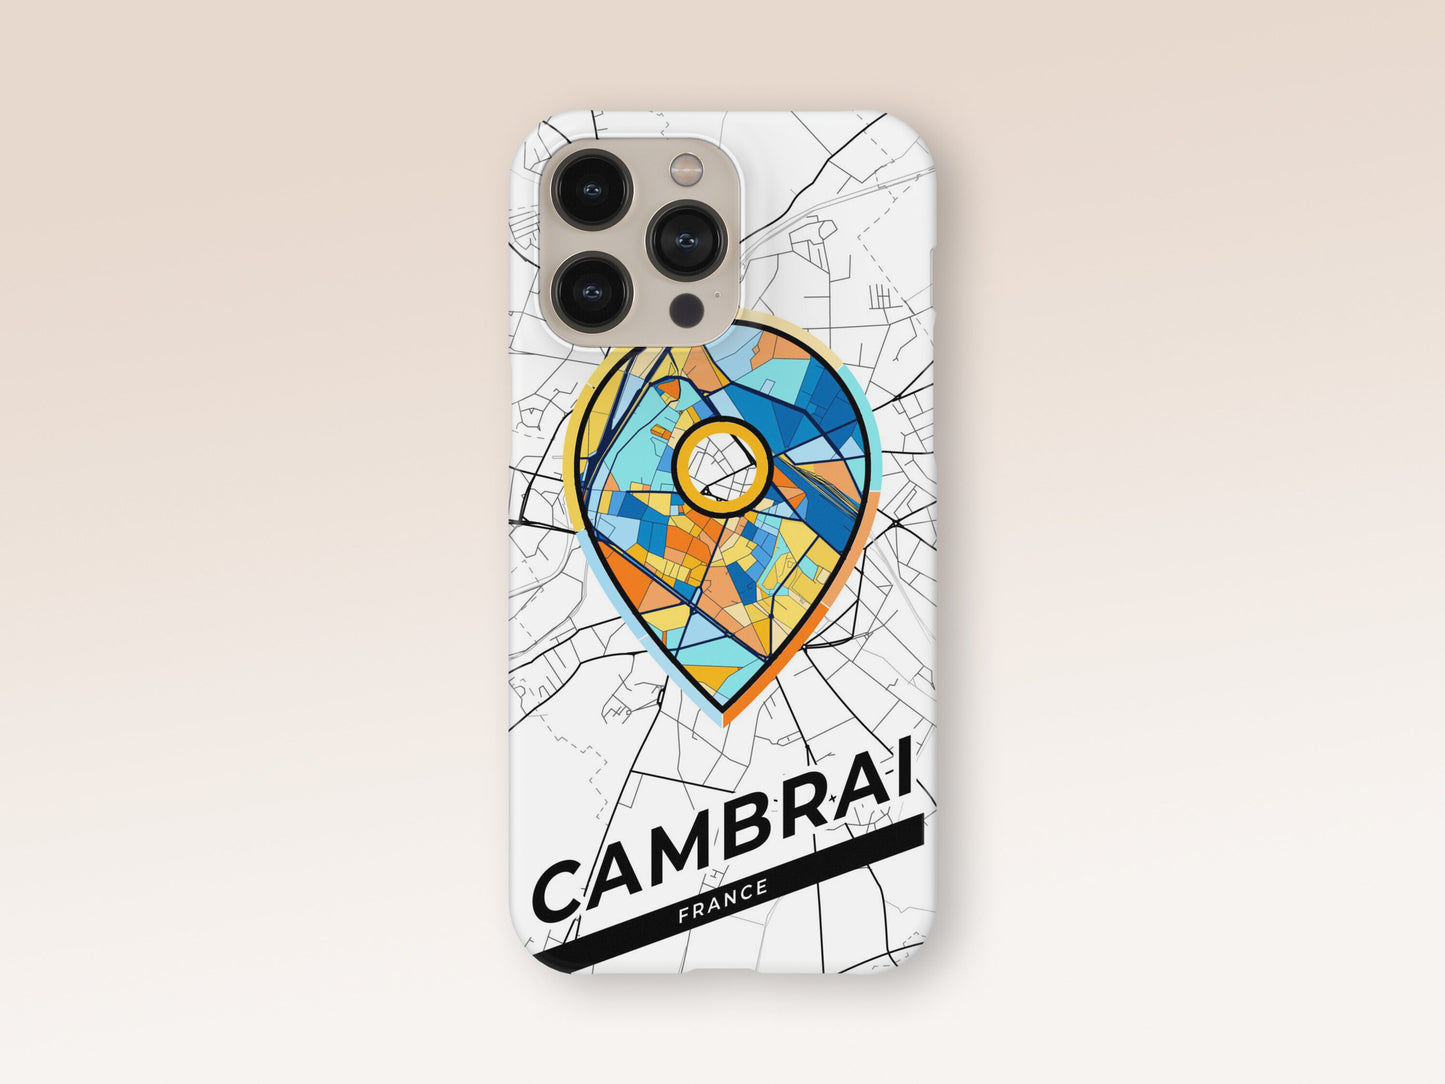 Cambrai France slim phone case with colorful icon. Birthday, wedding or housewarming gift. Couple match cases. 1